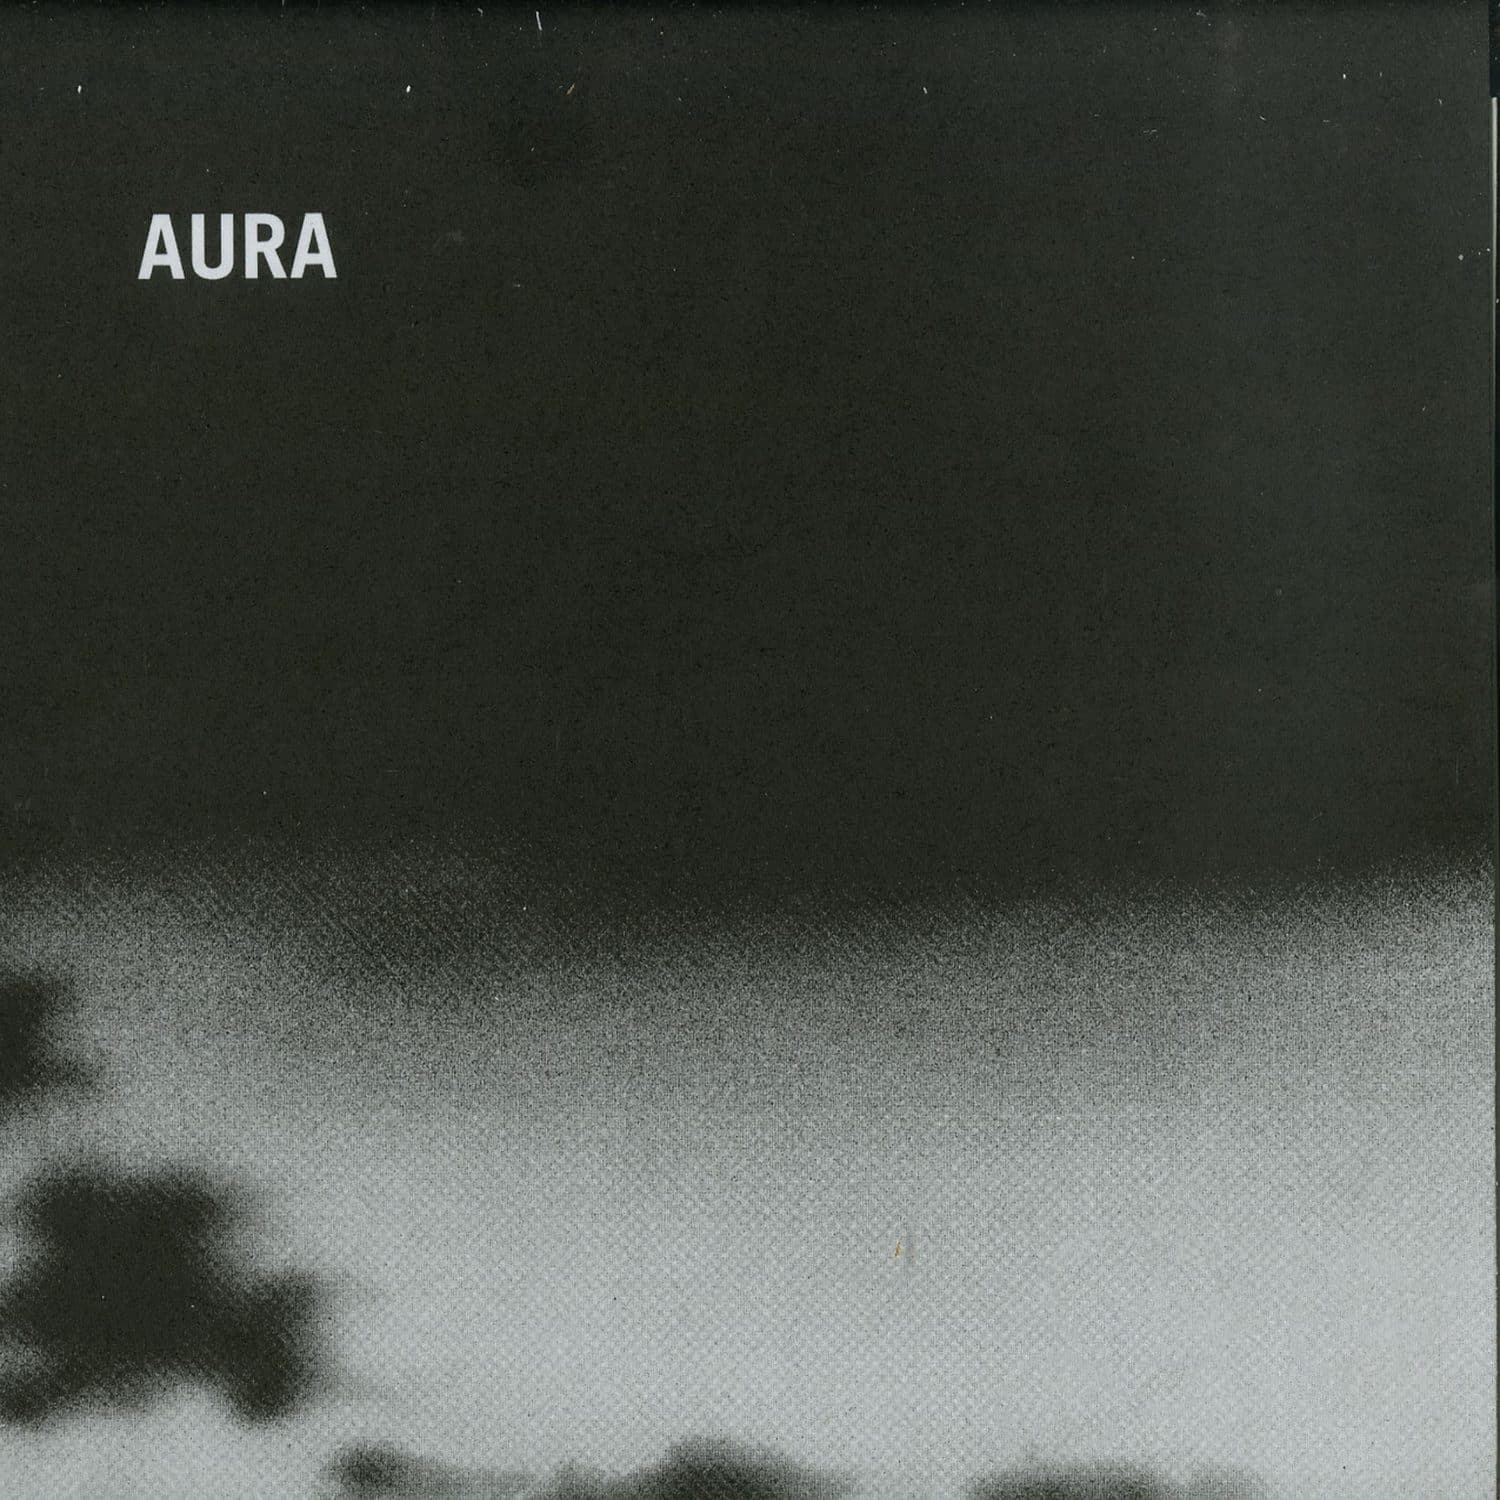 Aura - MAGIC LOVER / LET GO, ITS OVER 